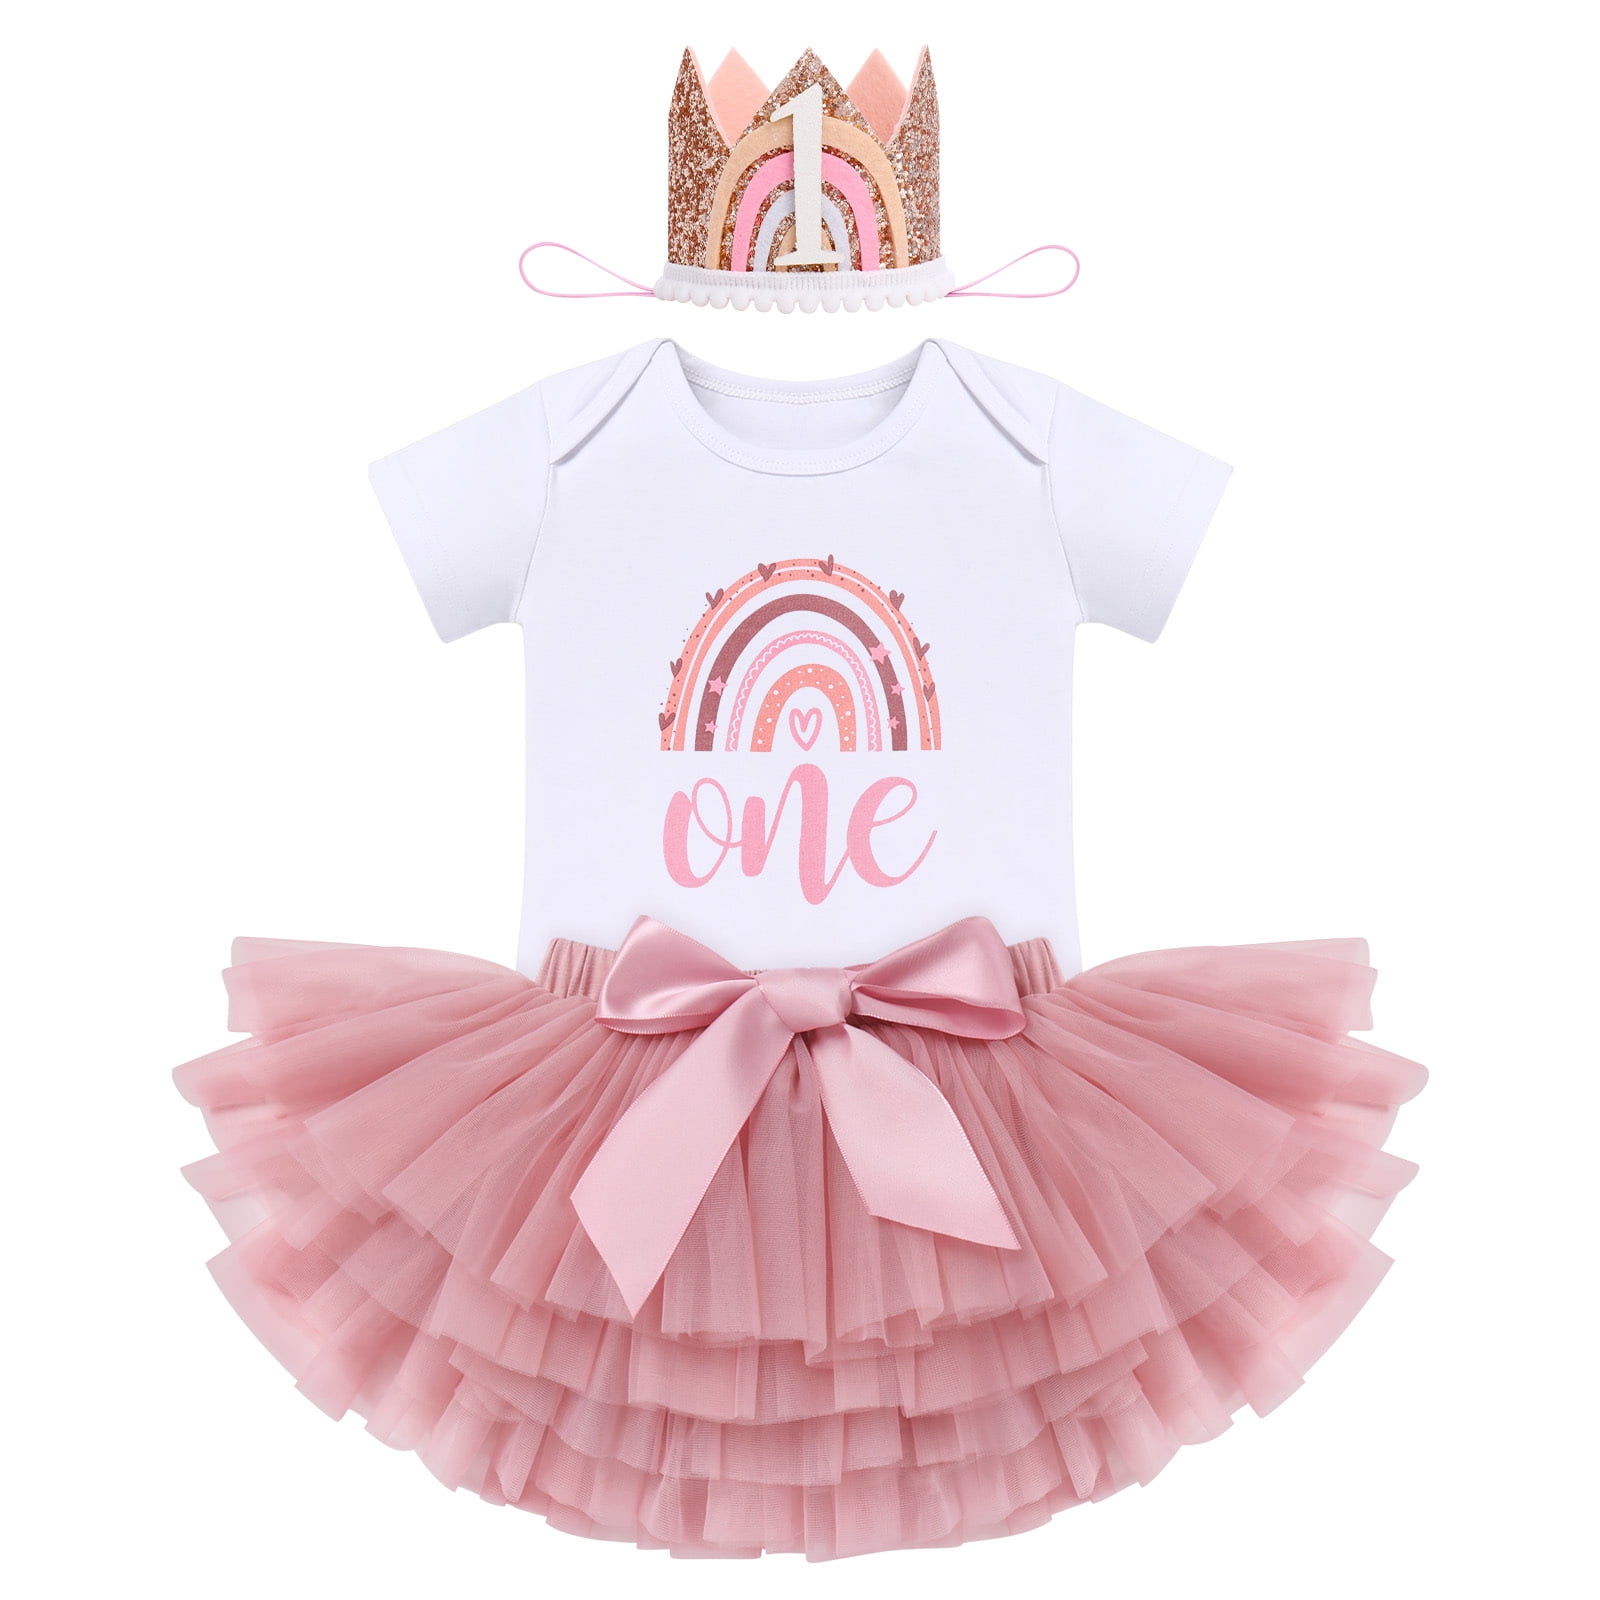 first birthday outfit for baby girl in pink and gold,customized 1st birthday shirt,pink ruffle tutu,baby girl diaper cover,cake smash outfit 